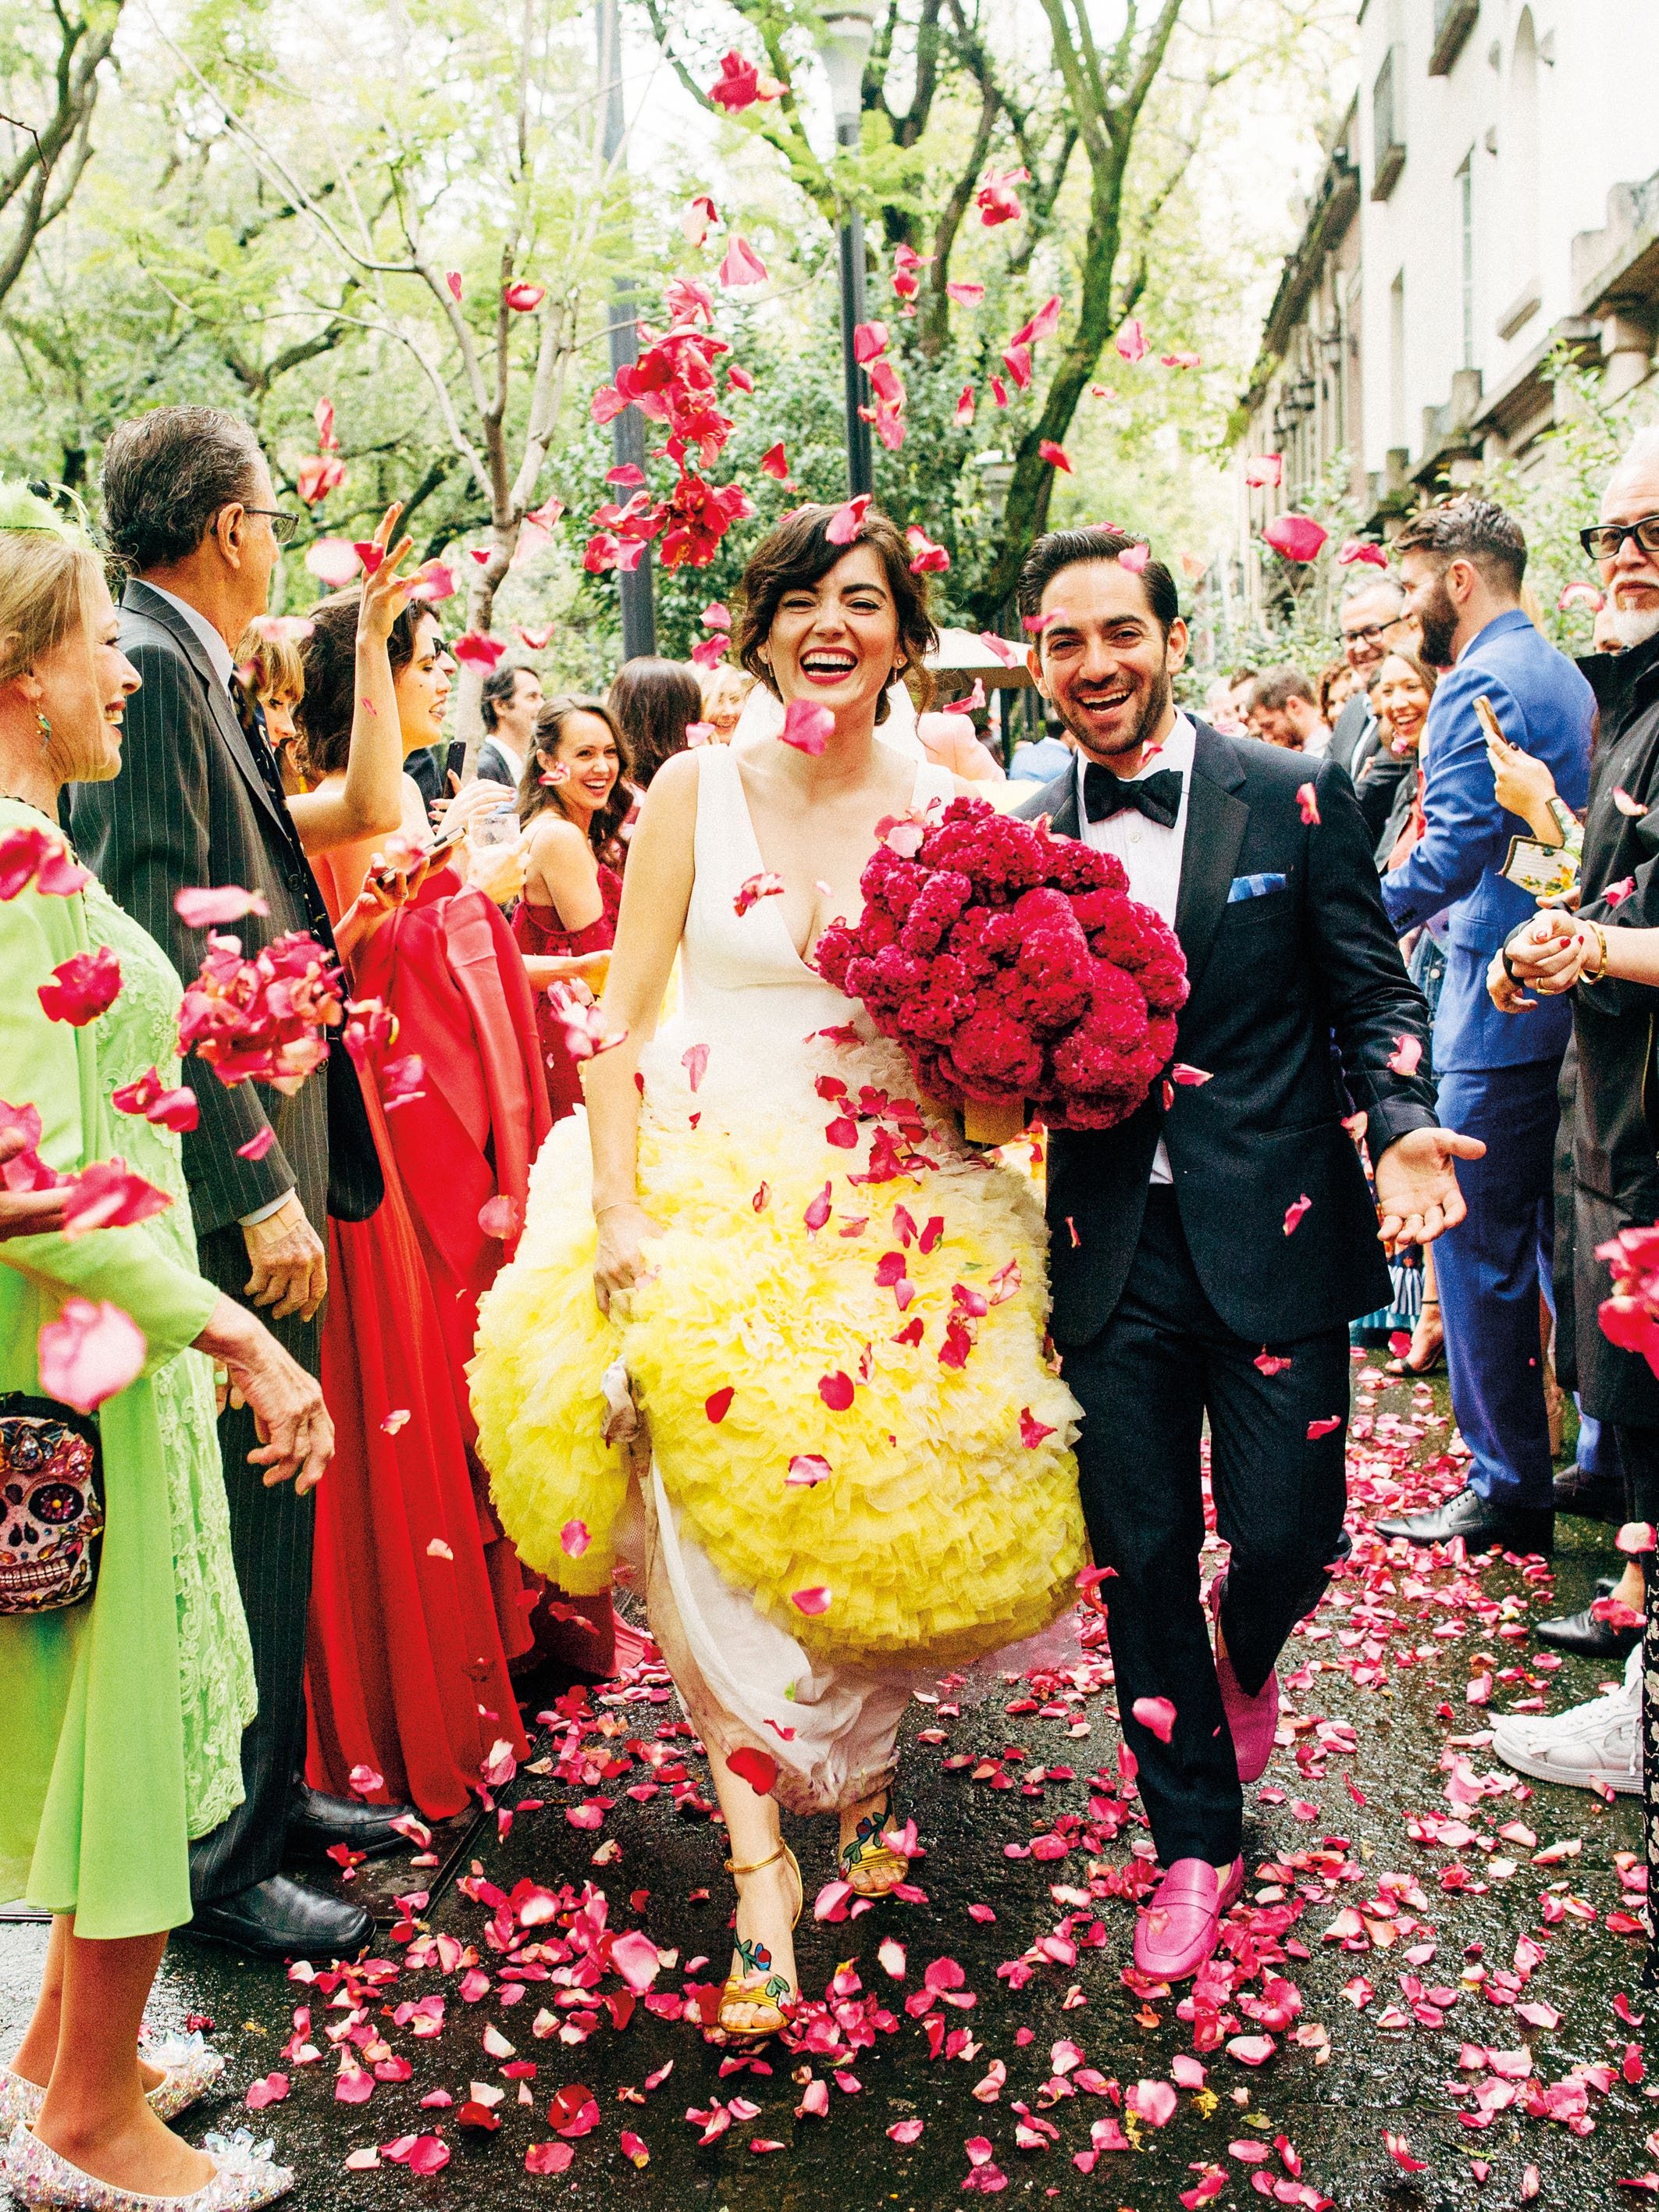 This Wedding Features Every Color in the Rainbow